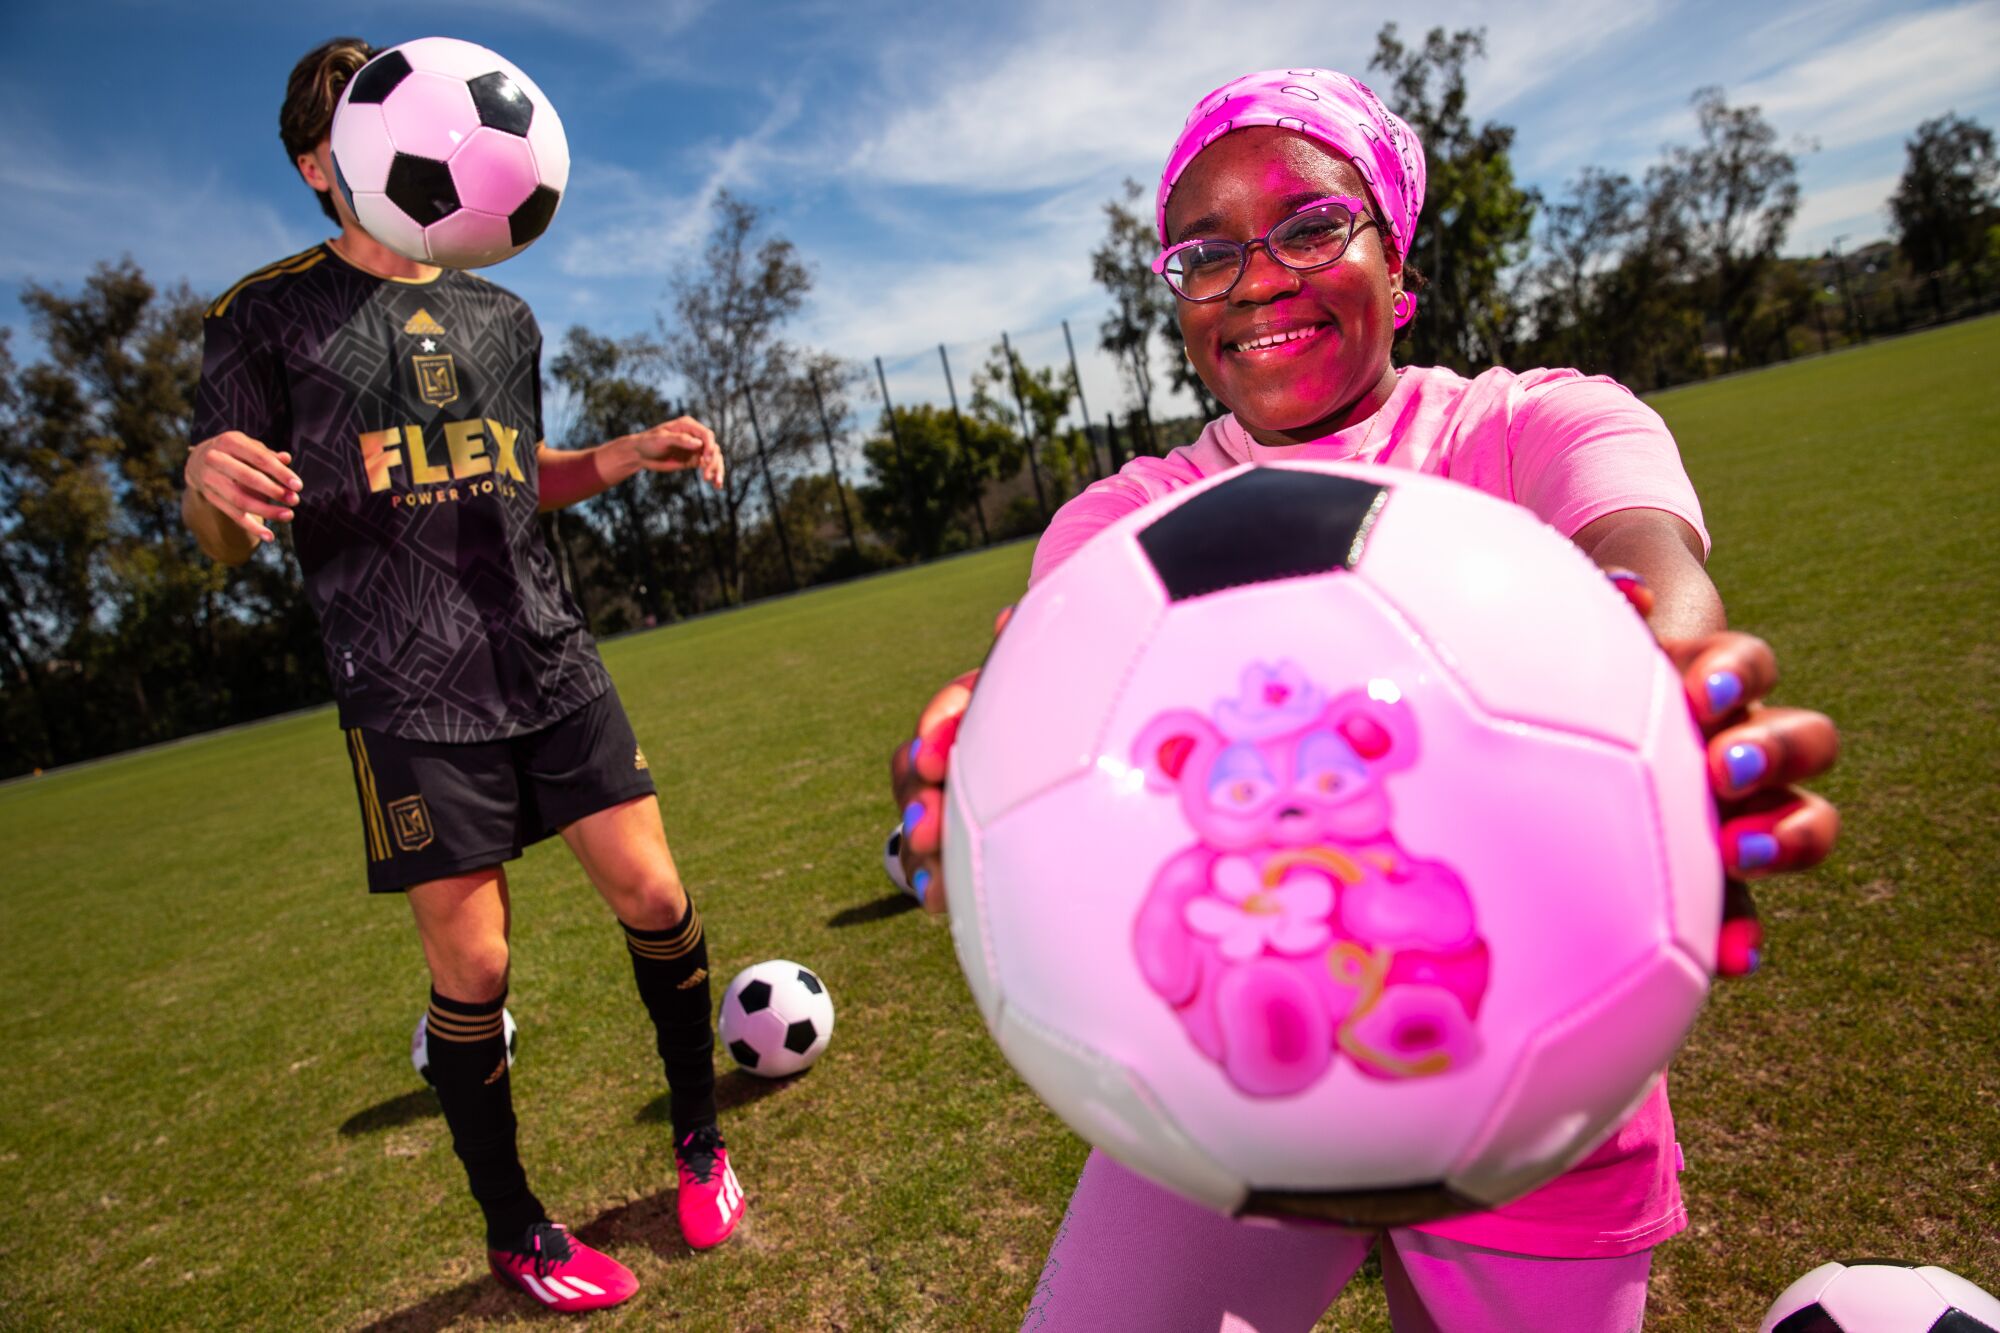 A woman in pink shows off a soccer ball, with a cute image,  as a soccer ball obscures a player's face in the background.